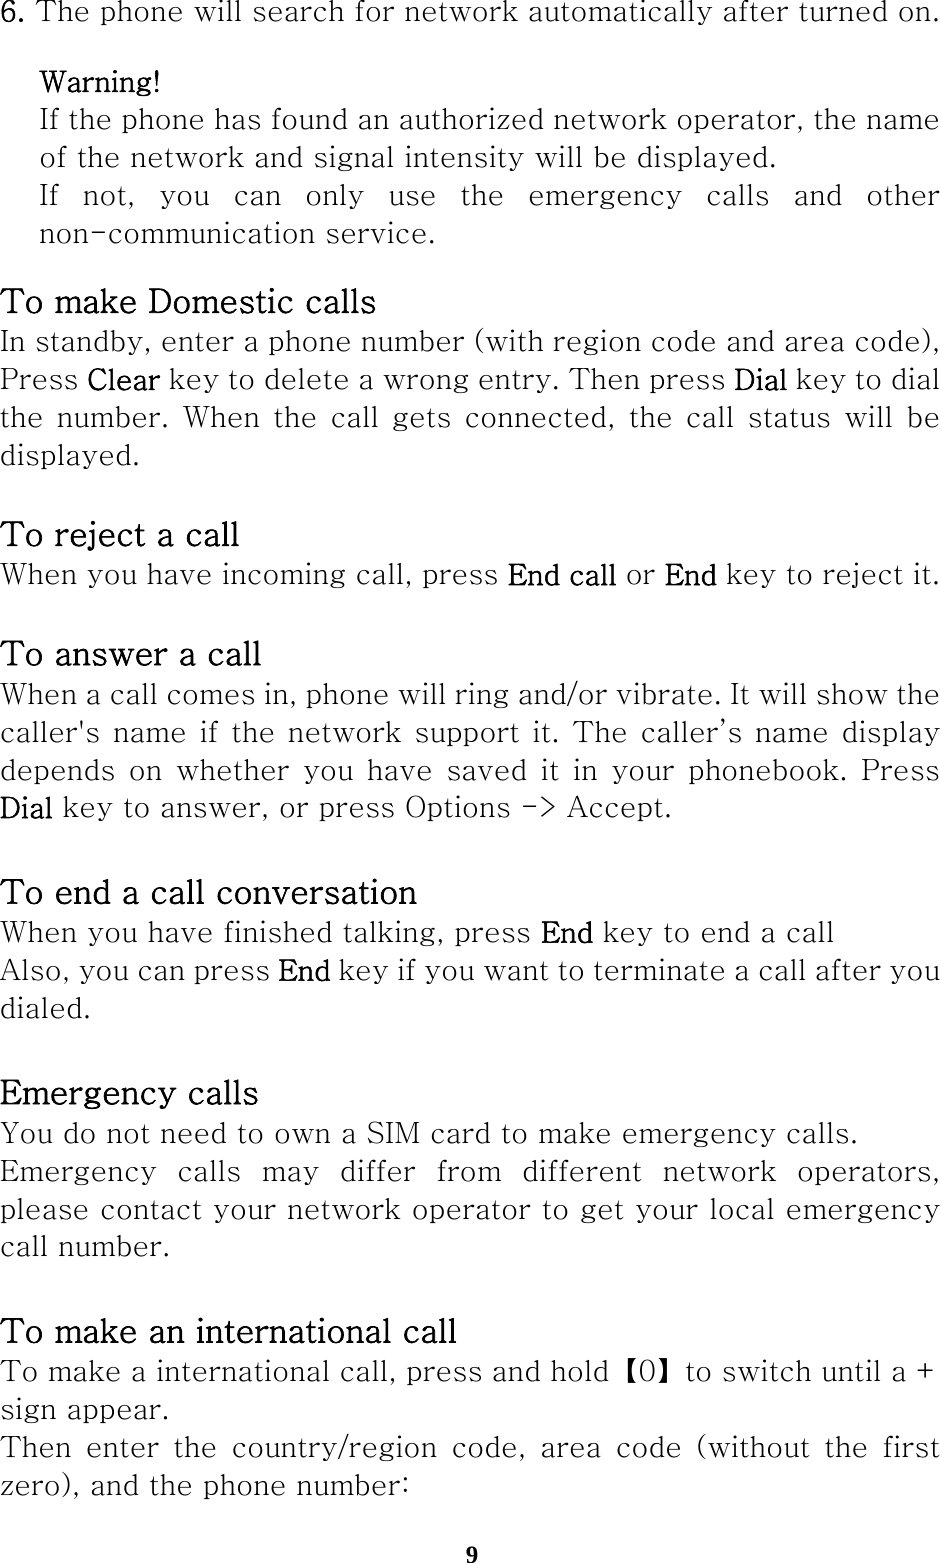  96. The phone will search for network automatically after turned on.  Warning! If the phone has found an authorized network operator, the name of the network and signal intensity will be displayed. If  not,  you  can  only  use  the  emergency  calls  and  other non-communication service. To make Domestic calls In standby, enter a phone number (with region code and area code), Press Clear key to delete a wrong entry. Then press Dial key to dial the number.  When  the  call gets  connected,  the call status  will  be displayed.   To reject a call When you have incoming call, press End call or End key to reject it.  To answer a call When a call comes in, phone will ring and/or vibrate. It will show the caller&apos;s name if the network support it. The caller’s name display depends  on  whether  you  have  saved  it  in  your  phonebook.  Press Dial key to answer, or press Options -&gt; Accept.  To end a call conversation When you have finished talking, press End key to end a call Also, you can press End key if you want to terminate a call after you dialed.  Emergency calls You do not need to own a SIM card to make emergency calls. Emergency calls may differ from different network operators, please contact your network operator to get your local emergency call number.  To make an international call To make a international call, press and hold【0】to switch until a + sign appear. Then  enter  the  country/region  code,  area  code  (without  the  first zero), and the phone number: 